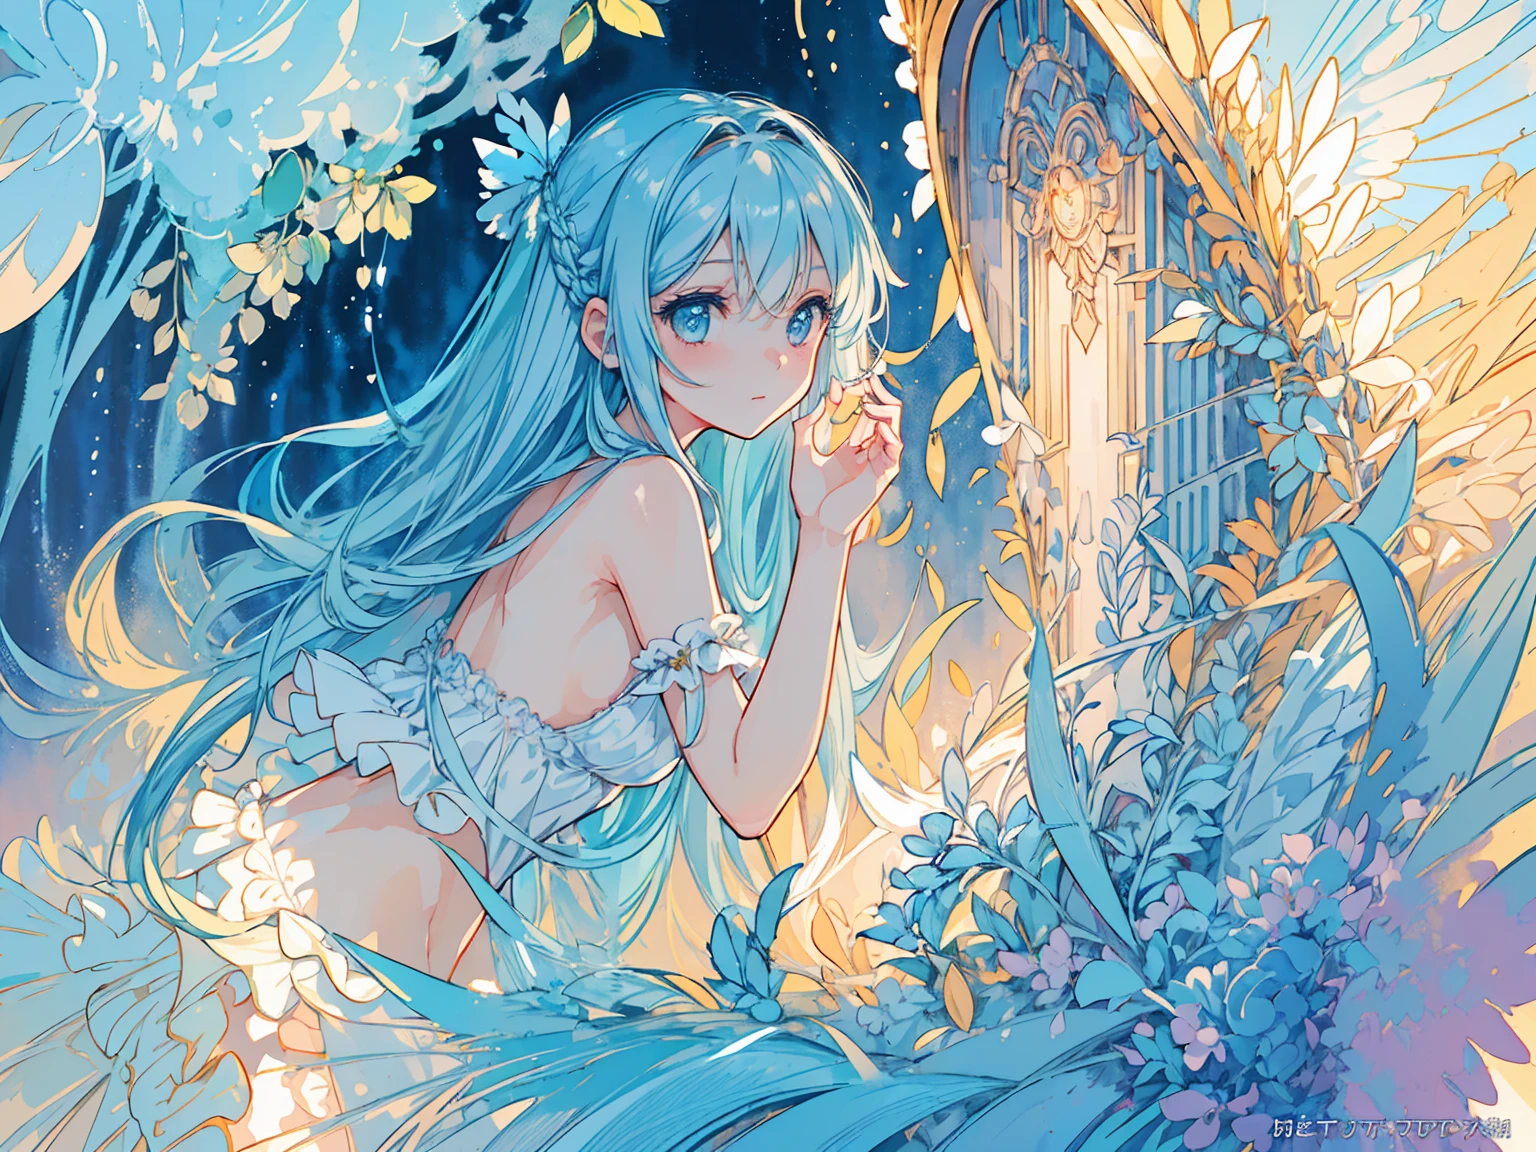 masterpiece, best quality, extremely detailed, (illustration, official art:1.1), 1 girl ,(((( light blue long hair)))), light blue hair, ,10 years old, long hair ((blush)) , cute face, big eyes, masterpiece, best quality,(((((a very delicate and beautiful girl))))),Amazing,beautiful detailed eyes,blunt bangs((((little delicate girl)))),tareme(true beautiful:1.2), sense of depth,dynamic angle,affectionate smile, (true beautiful:1.2),,(tiny 1girl model:1.2),(flat chest)), Soft Focus ,((ultra-detailliert:1.2))、(The best lighting、Best Shadows、extremely delicate and beautiful)、(the Extremely Detailed CG Unity 8K Wallpapers、​masterpiece、best qualtiy、ultra-detailliert)、(The best lighting、Best Shadows、extremely delicate and beautiful)、(the perfect body:1.5)、Best Quality, (Illustration:1.2), (Ultra-detailed), hyperdetails, (delicate detailed), (Intricate details), (Cinematic Light, best quality backlight), Perfect body, ( extremely delicate and beautiful), Cinematic Light、(masterpiece), sexy, posterior, floral lace undies, natural light, ,sky background,beautiful clouds,The light from the back window is backlit.,element,Watercolor pattern in calm colors),(watercolor texture), ((1 girl),,adorable,Angelic),light smile,lolita prostitute,best image quality